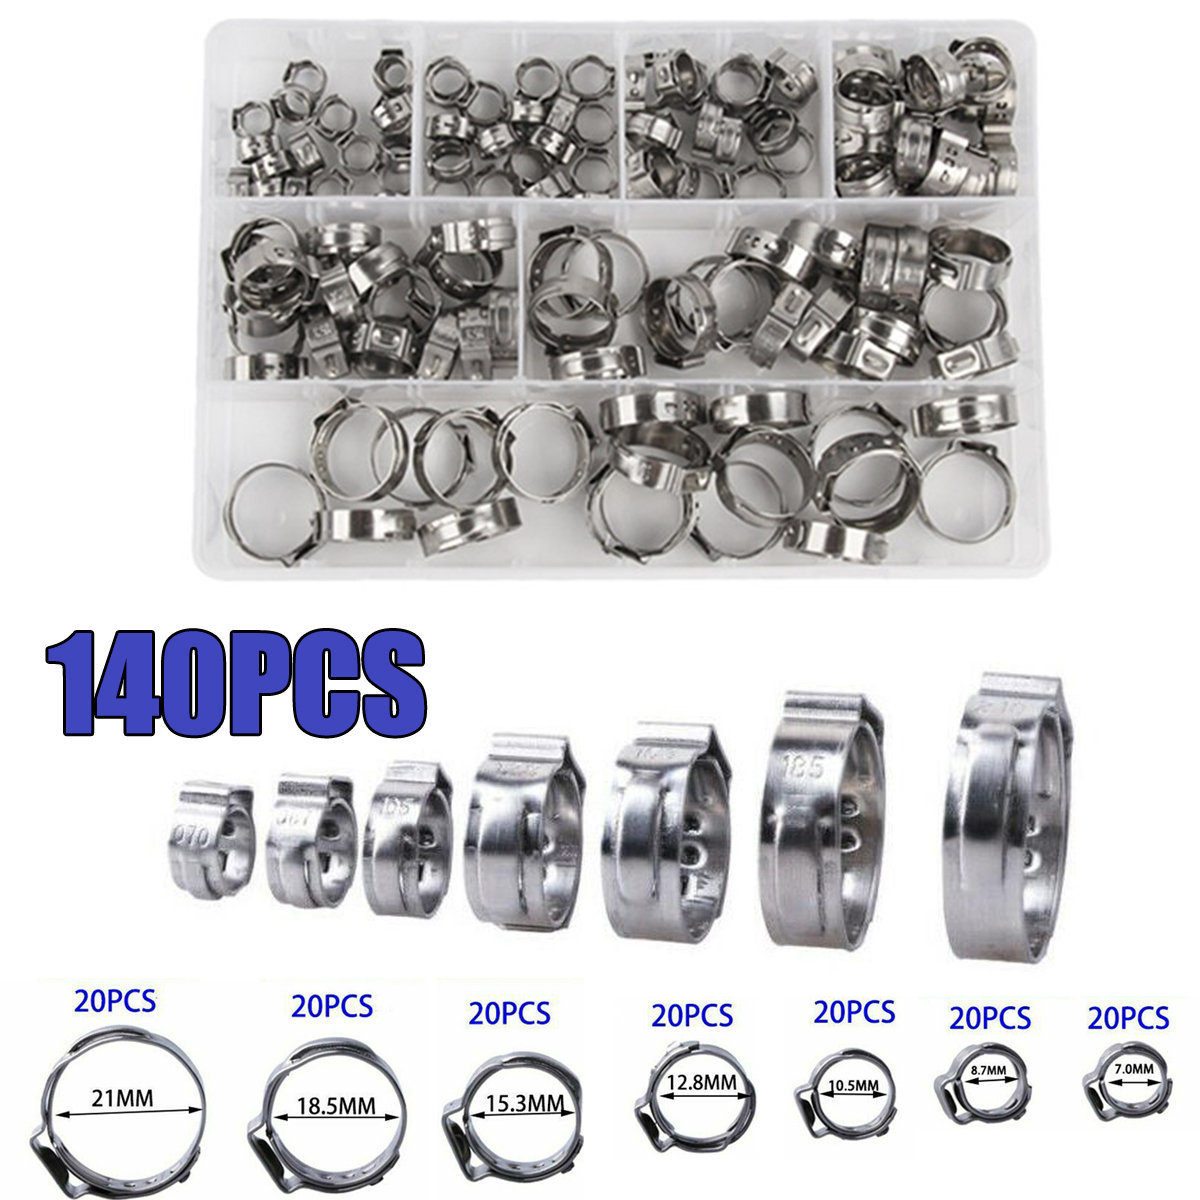 140PcsSet-Hose-Clamp-Stainless-Steel-Fuel-Pipe-Tube-Clips-Crimping-Tool-58-21mm-1730009-1